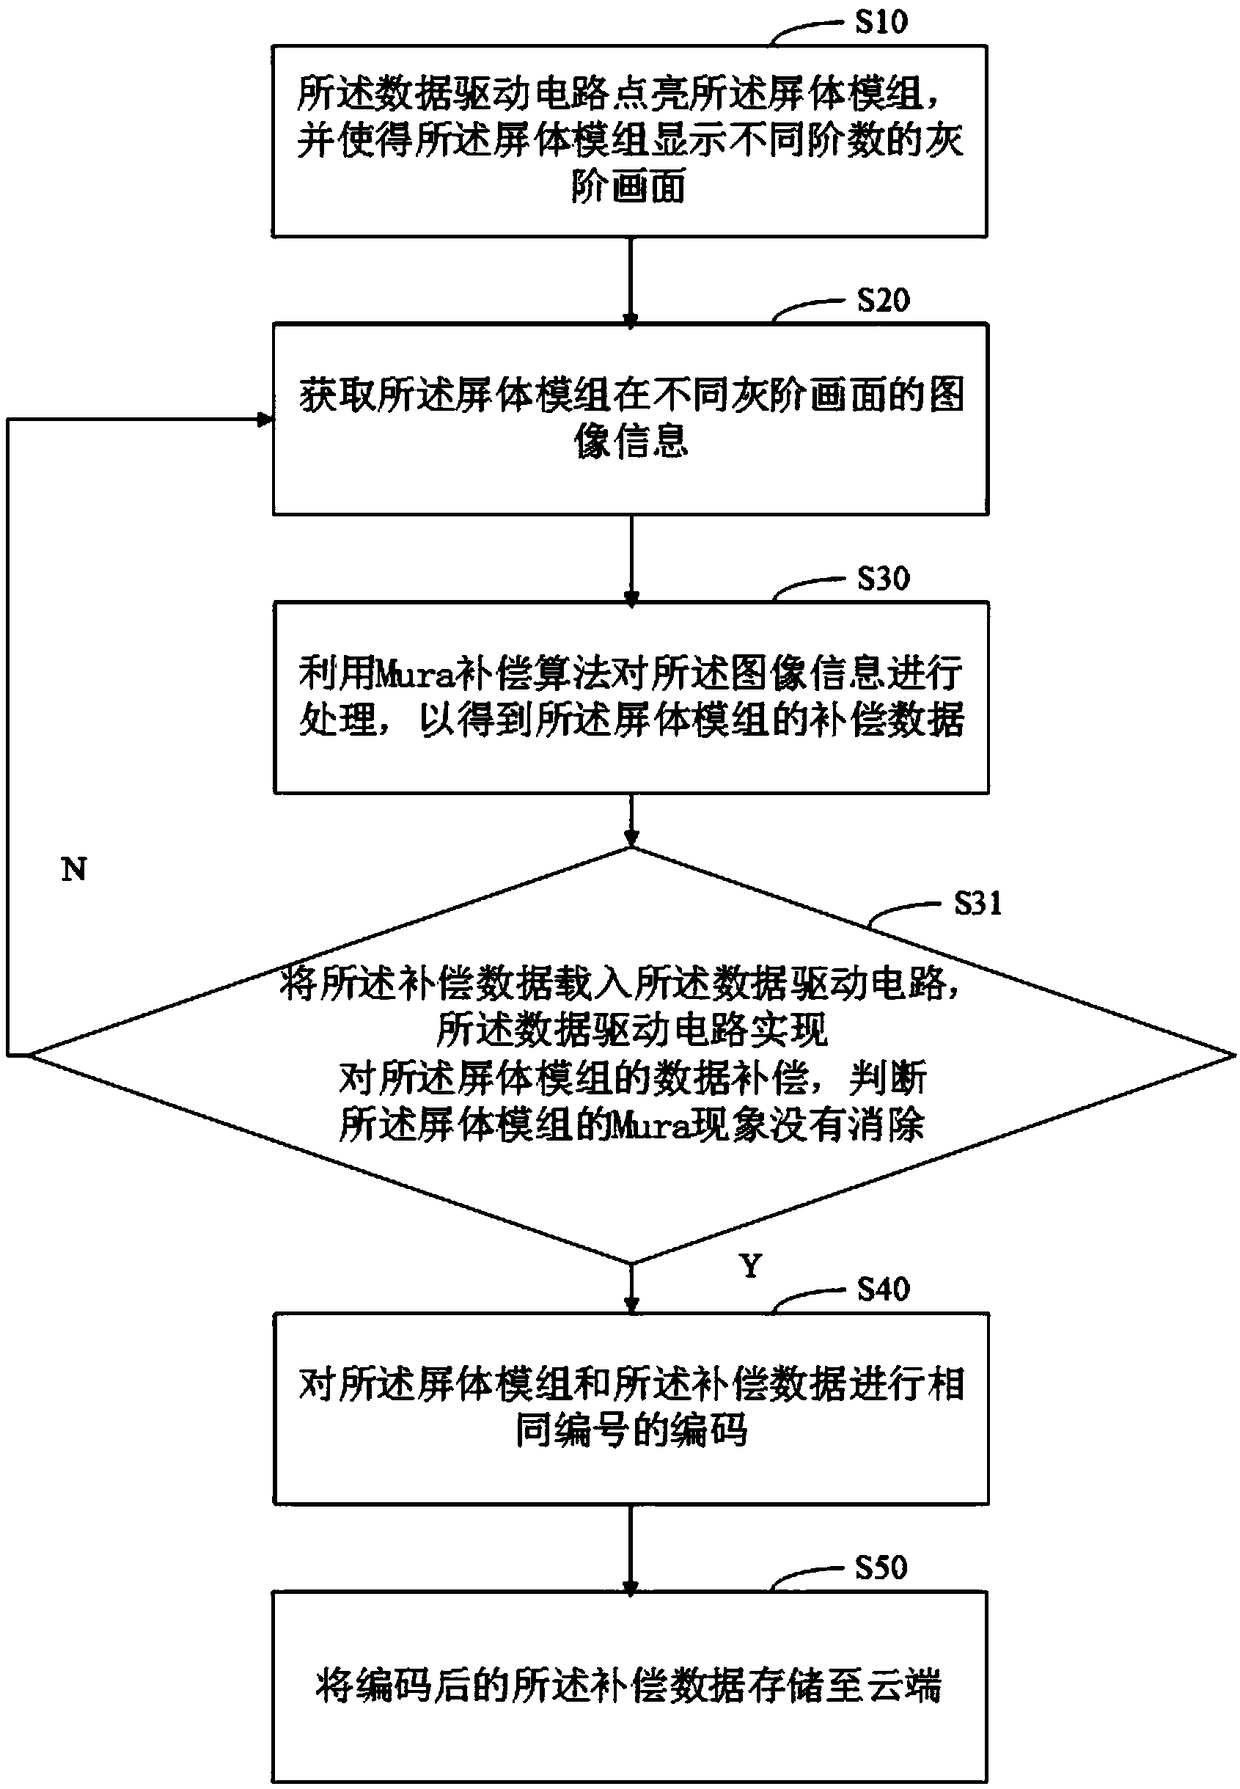 Compensation data acquiring and transmitting method and intelligent terminal